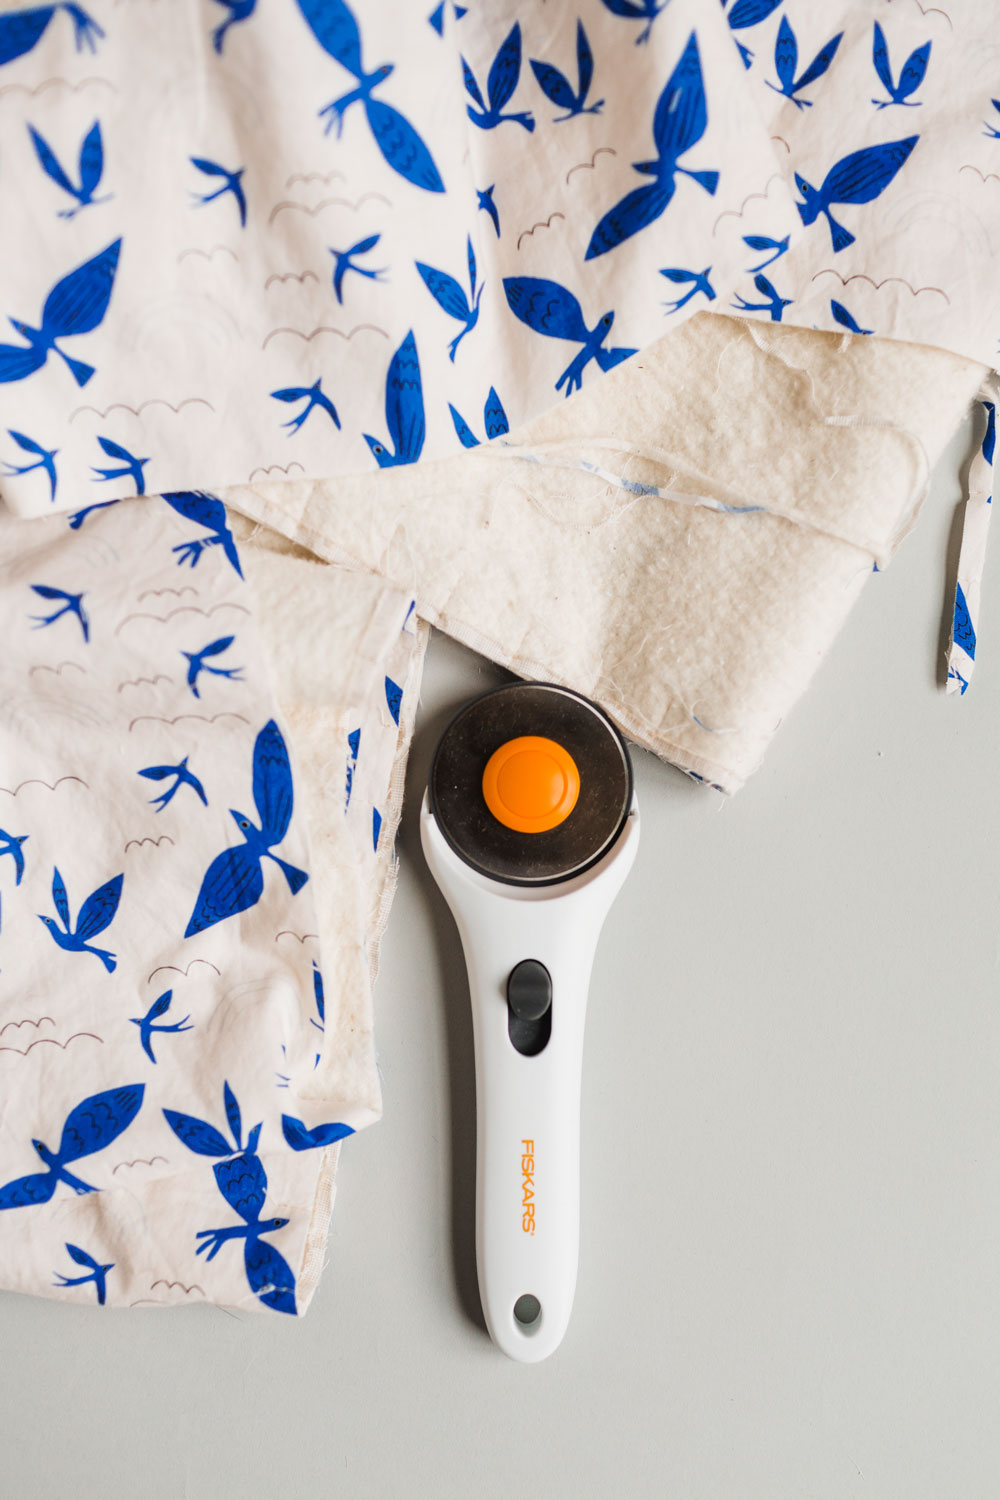 Learn all about different rotary cutter sizes, handles, and blades in this complete guide to quilting rotary cutters. Find the best rotary cutter for you! Suzy Quilts #rotarycutter #quiltingtools #quilting